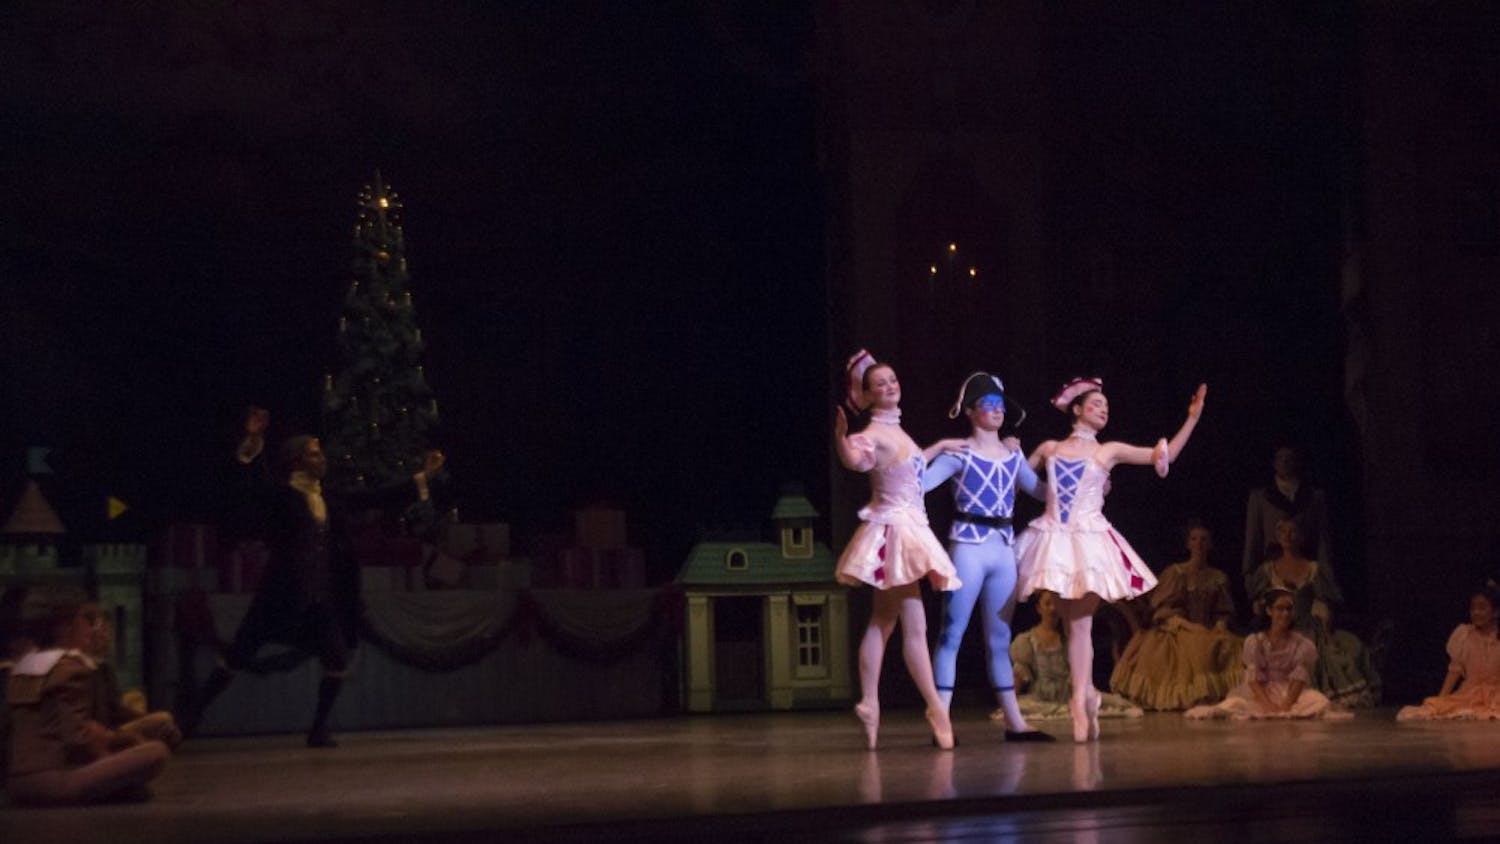 Cecilia Zanone, Reece Conrad and Jadyn Dahlberg dance as lifelike dolls in "The Nutcracker." The ballet will run at 7:30 p.m. on Nov. 30, Dec. 1 and 2, and at 2 p.m. Dec. 2 and 3 at the Musical Arts Center.